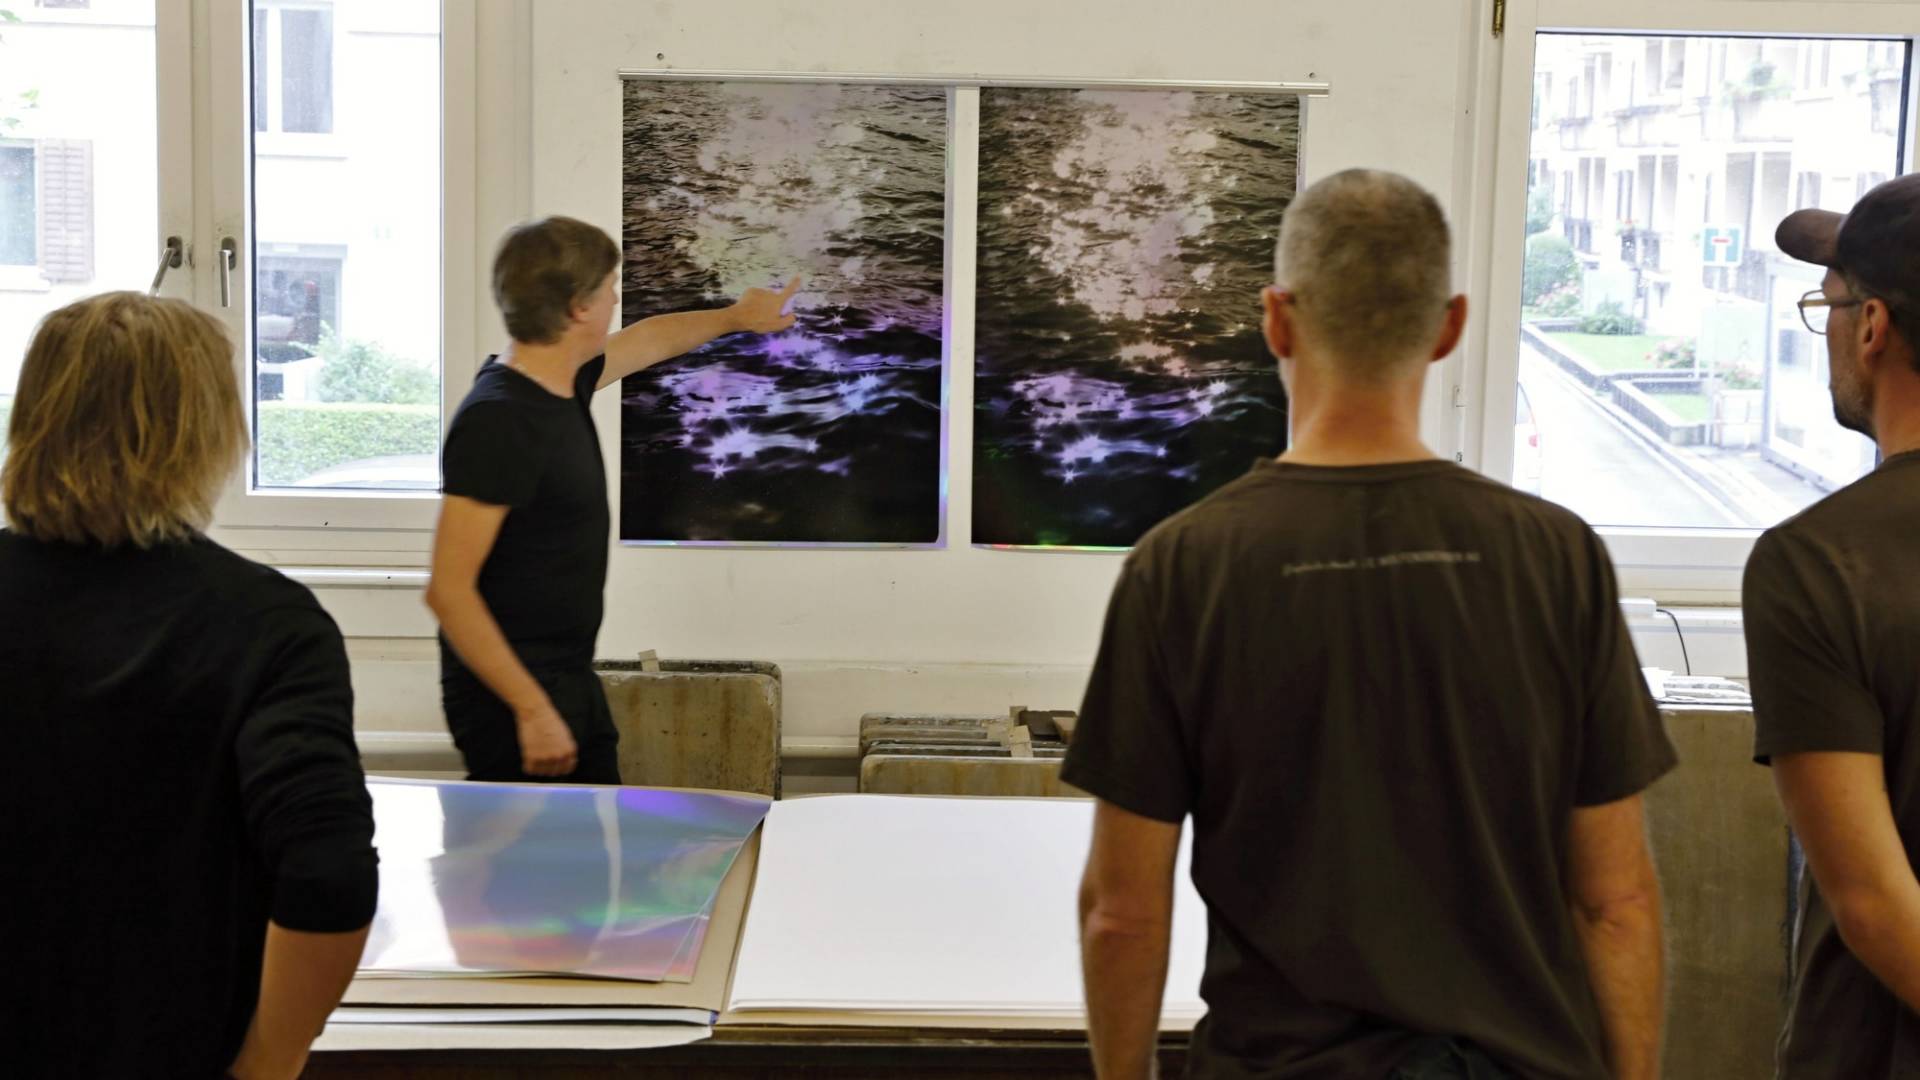 Two printouts of the "stella maris" graphic artwork on the wall. Four people are standing in front of it and examining the art print.